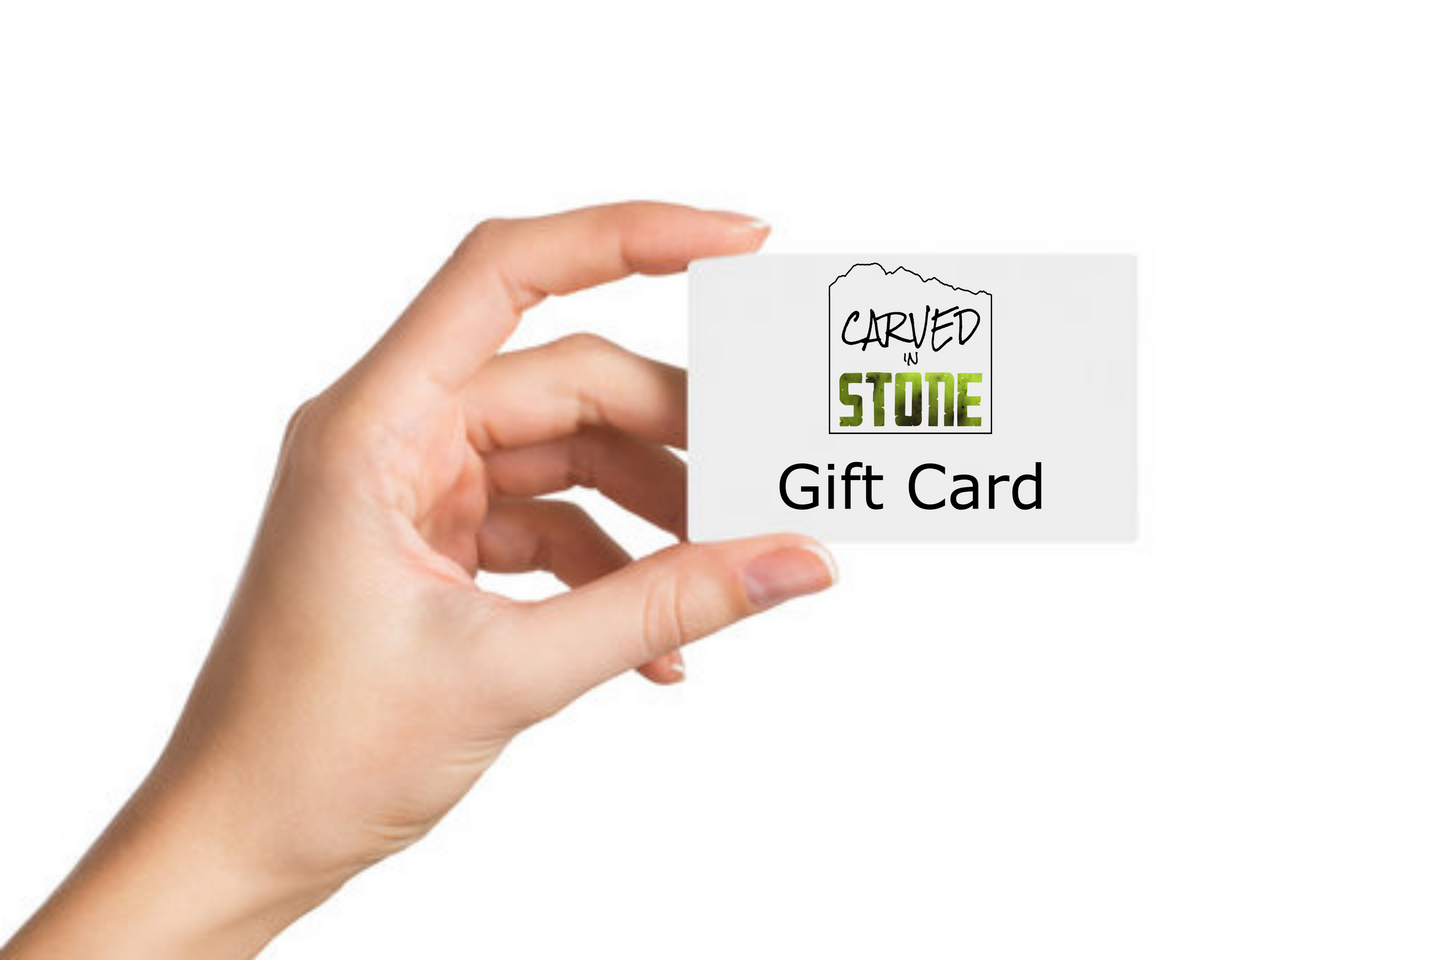 Hand holding a gift card.